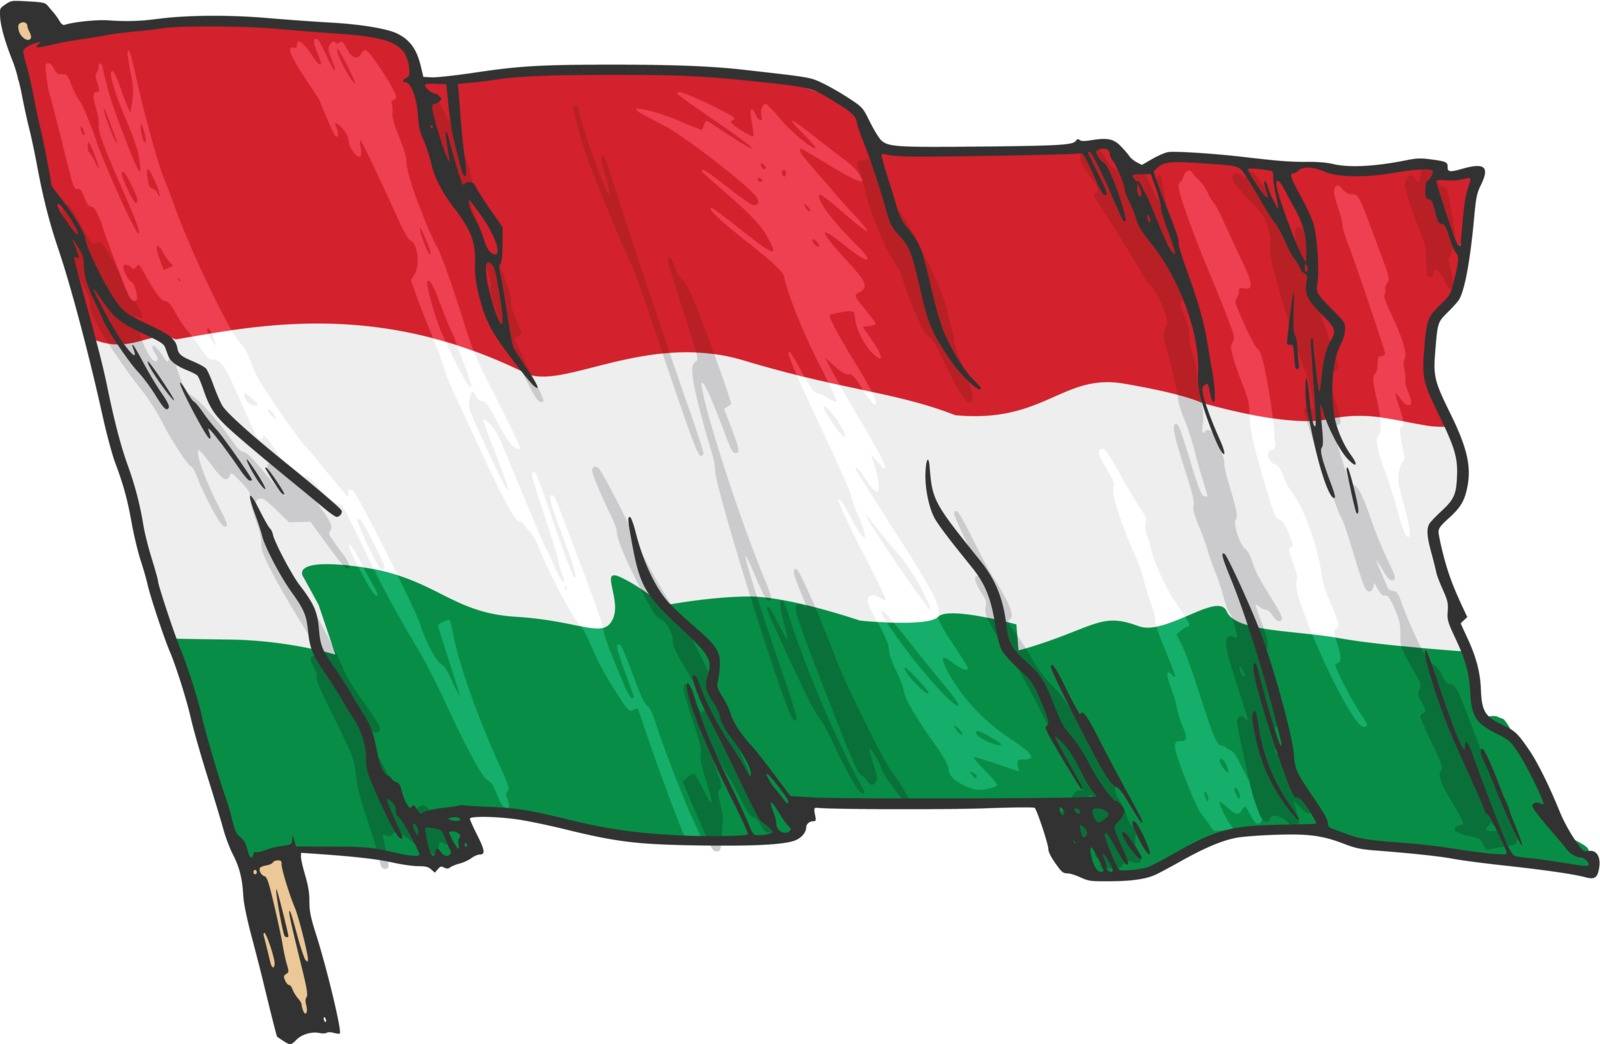 flag of Hungary by Perysty